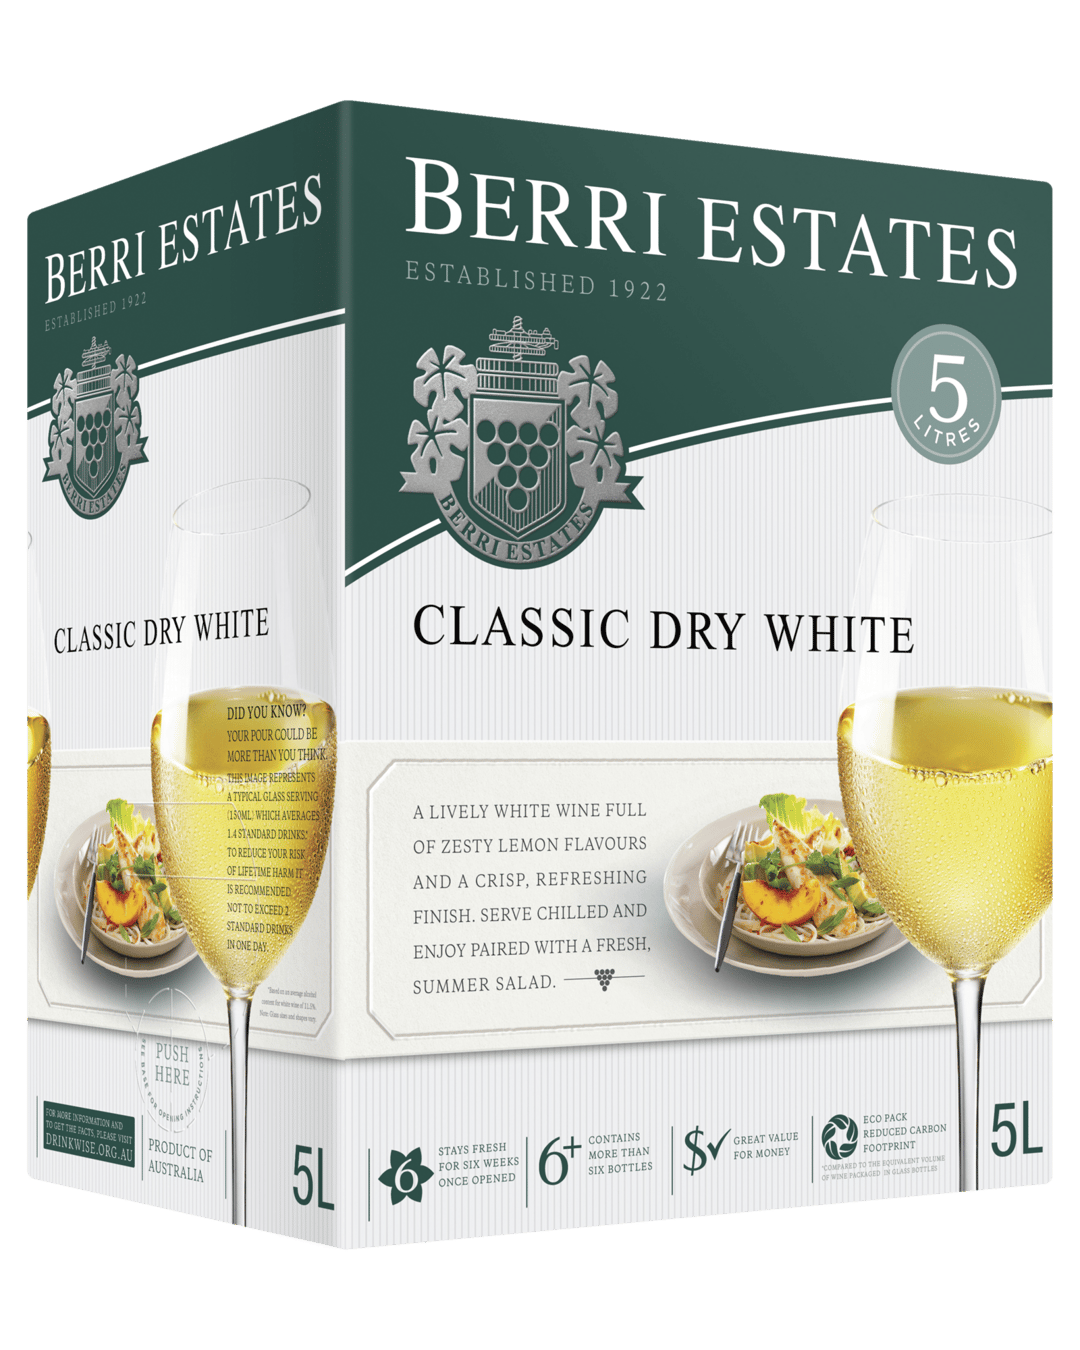 Buy Berri Estates Crisp Dry White Cask 5l Online or From Your Nearest Store  (at Everyday Low Prices) with ASAP Delivery Across Australia: BWS